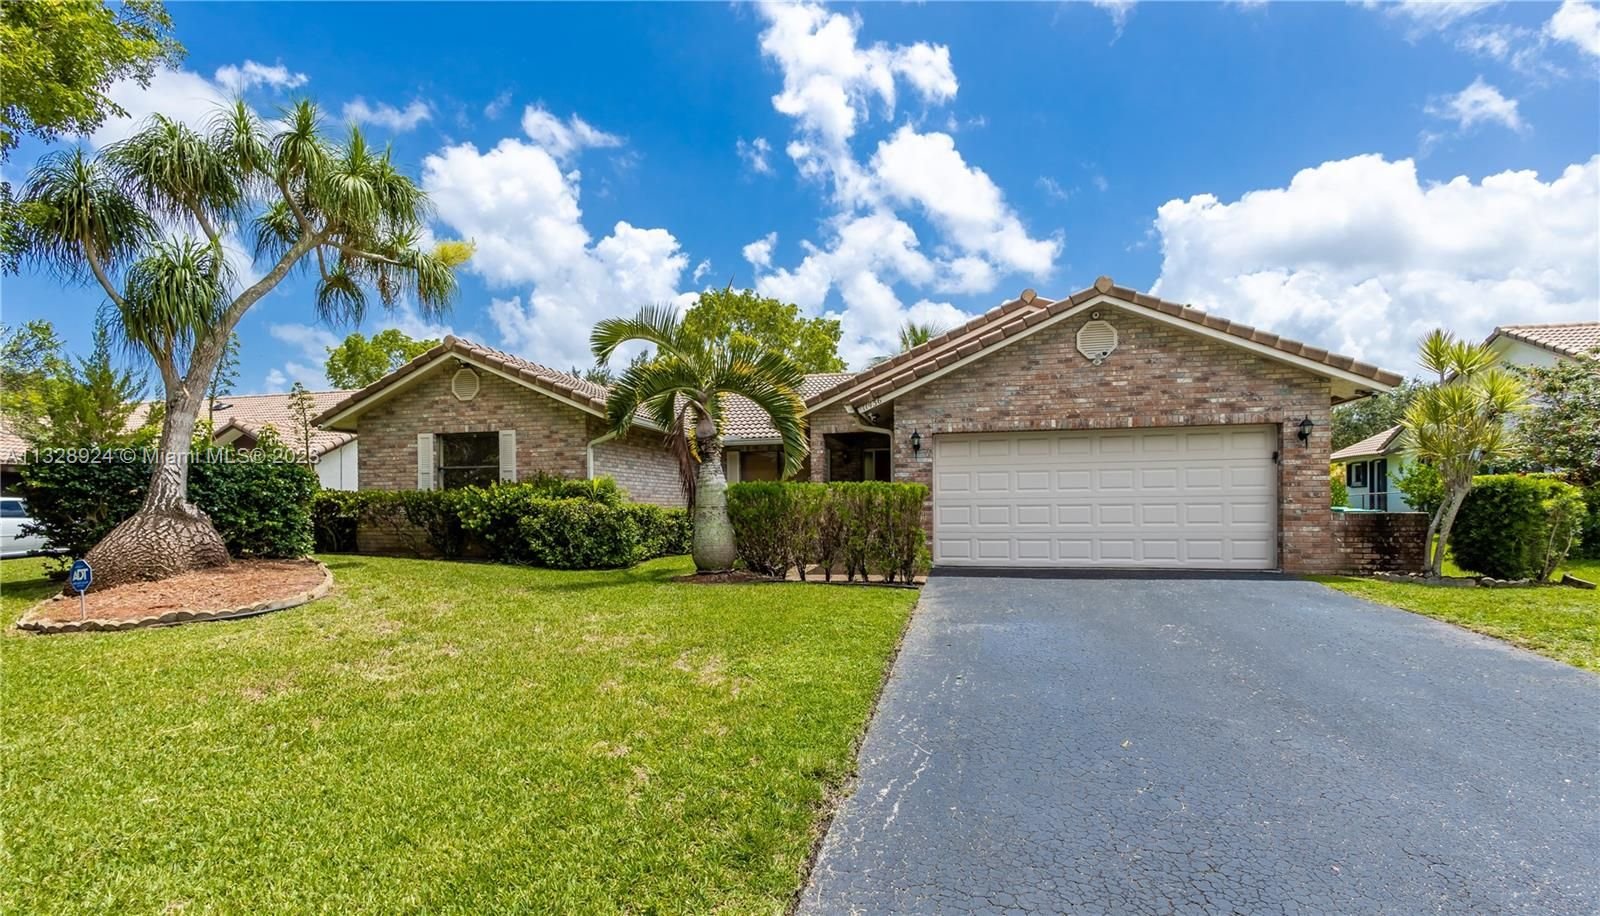 Real estate property located at 11436 1st Pl, Broward County, Coral Springs, FL